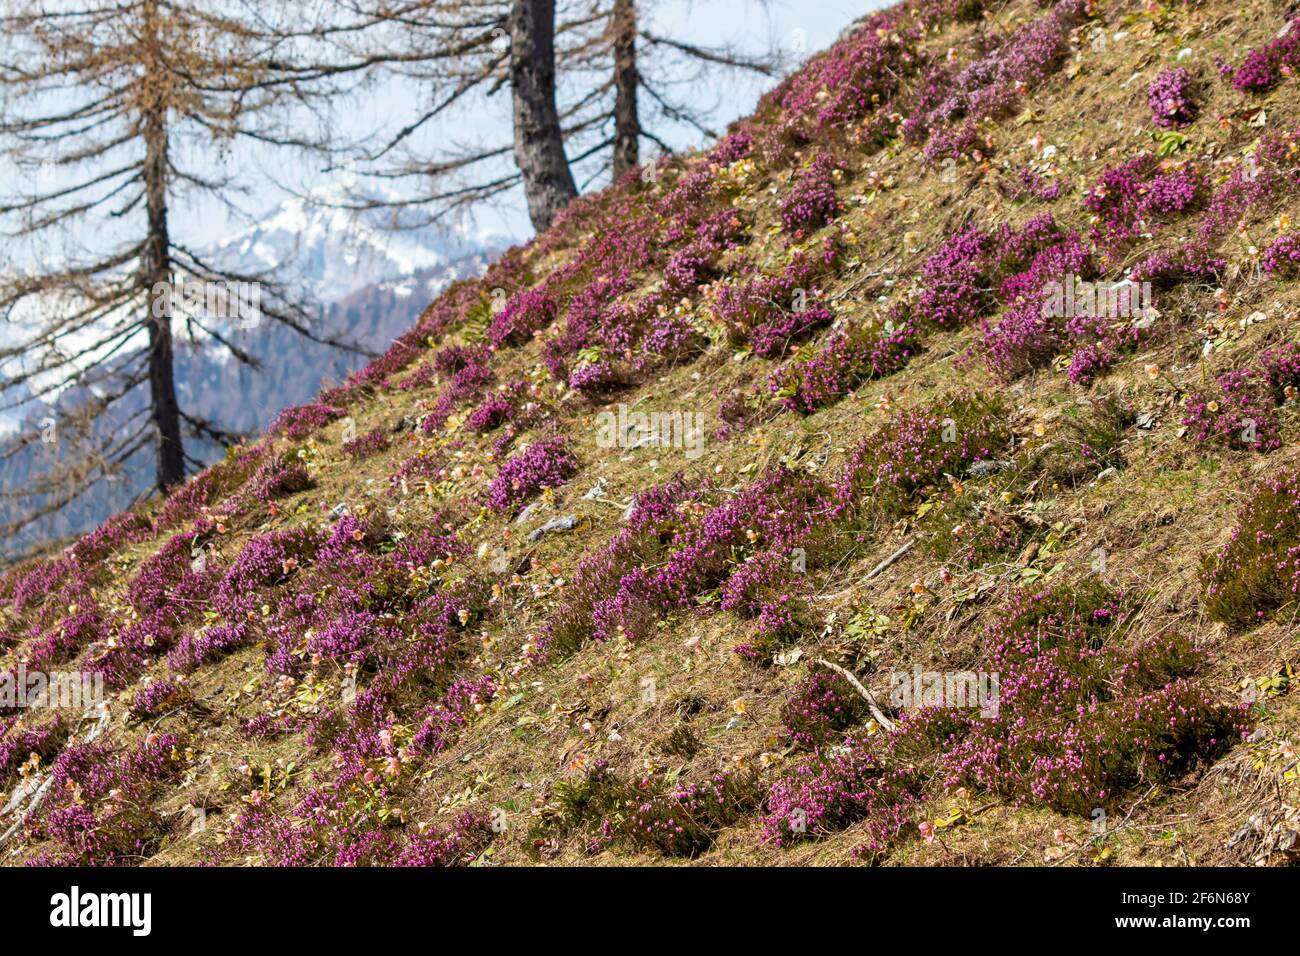 Winter heath growing in mountains Stock Photo